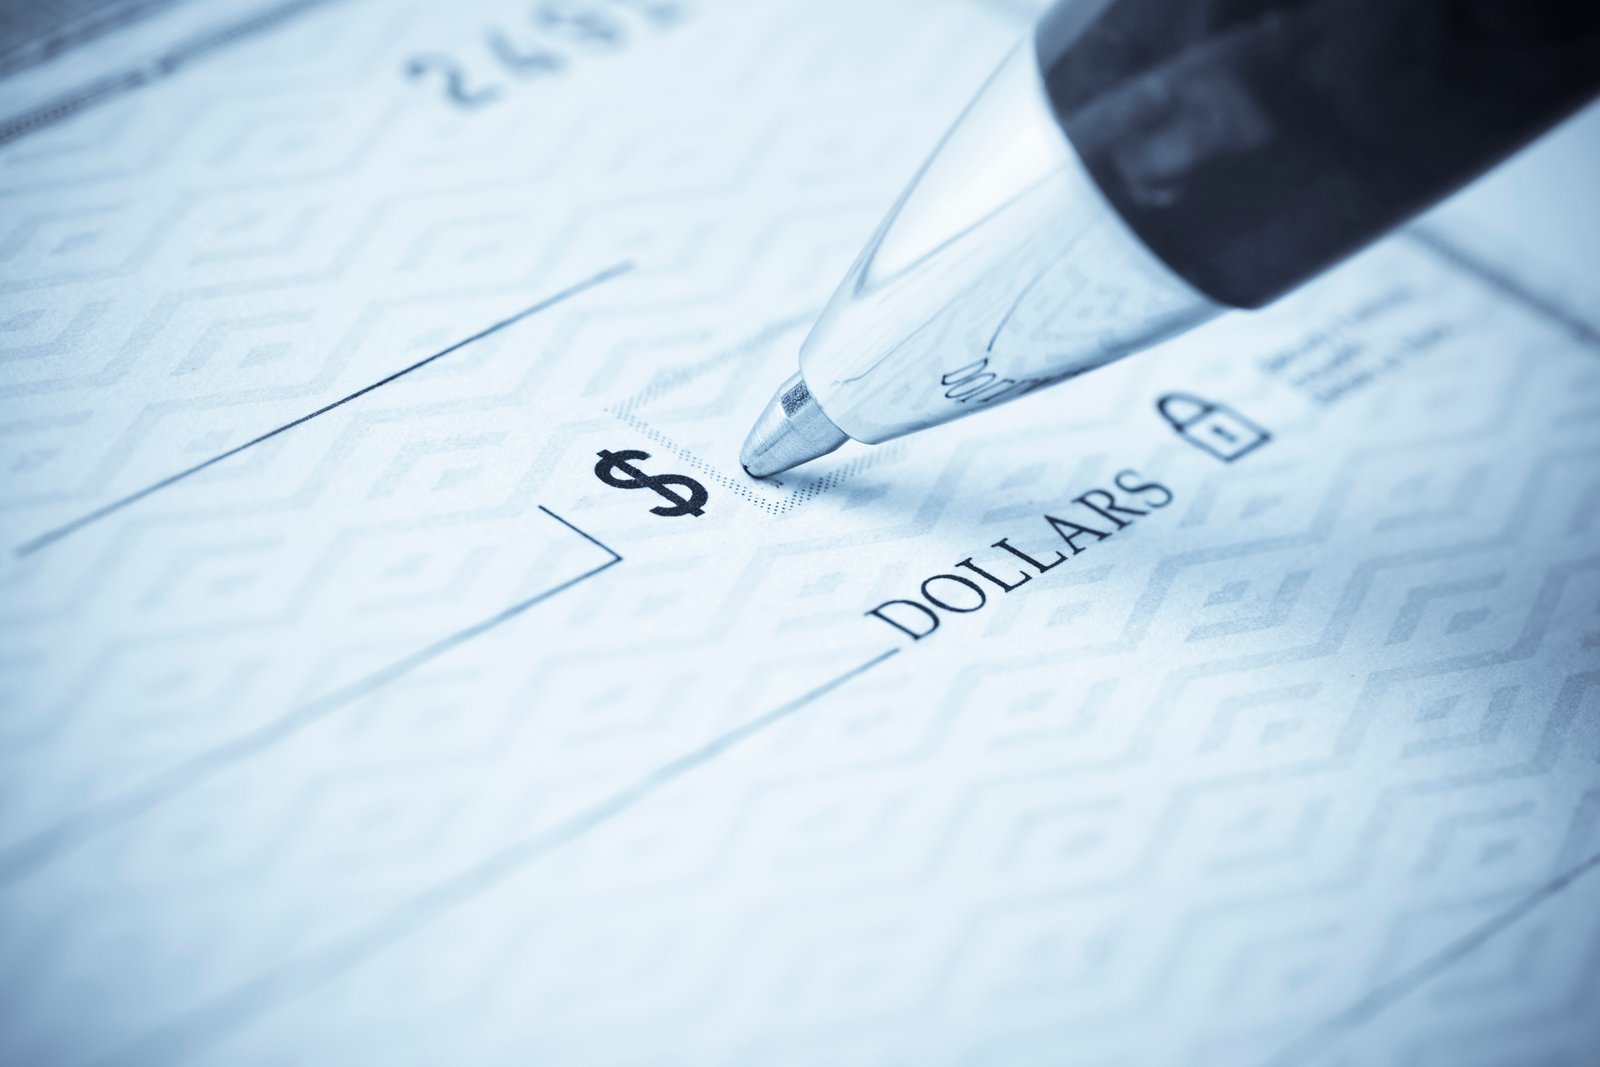 Writing a check.  Please visit my lightbox for more similar photos